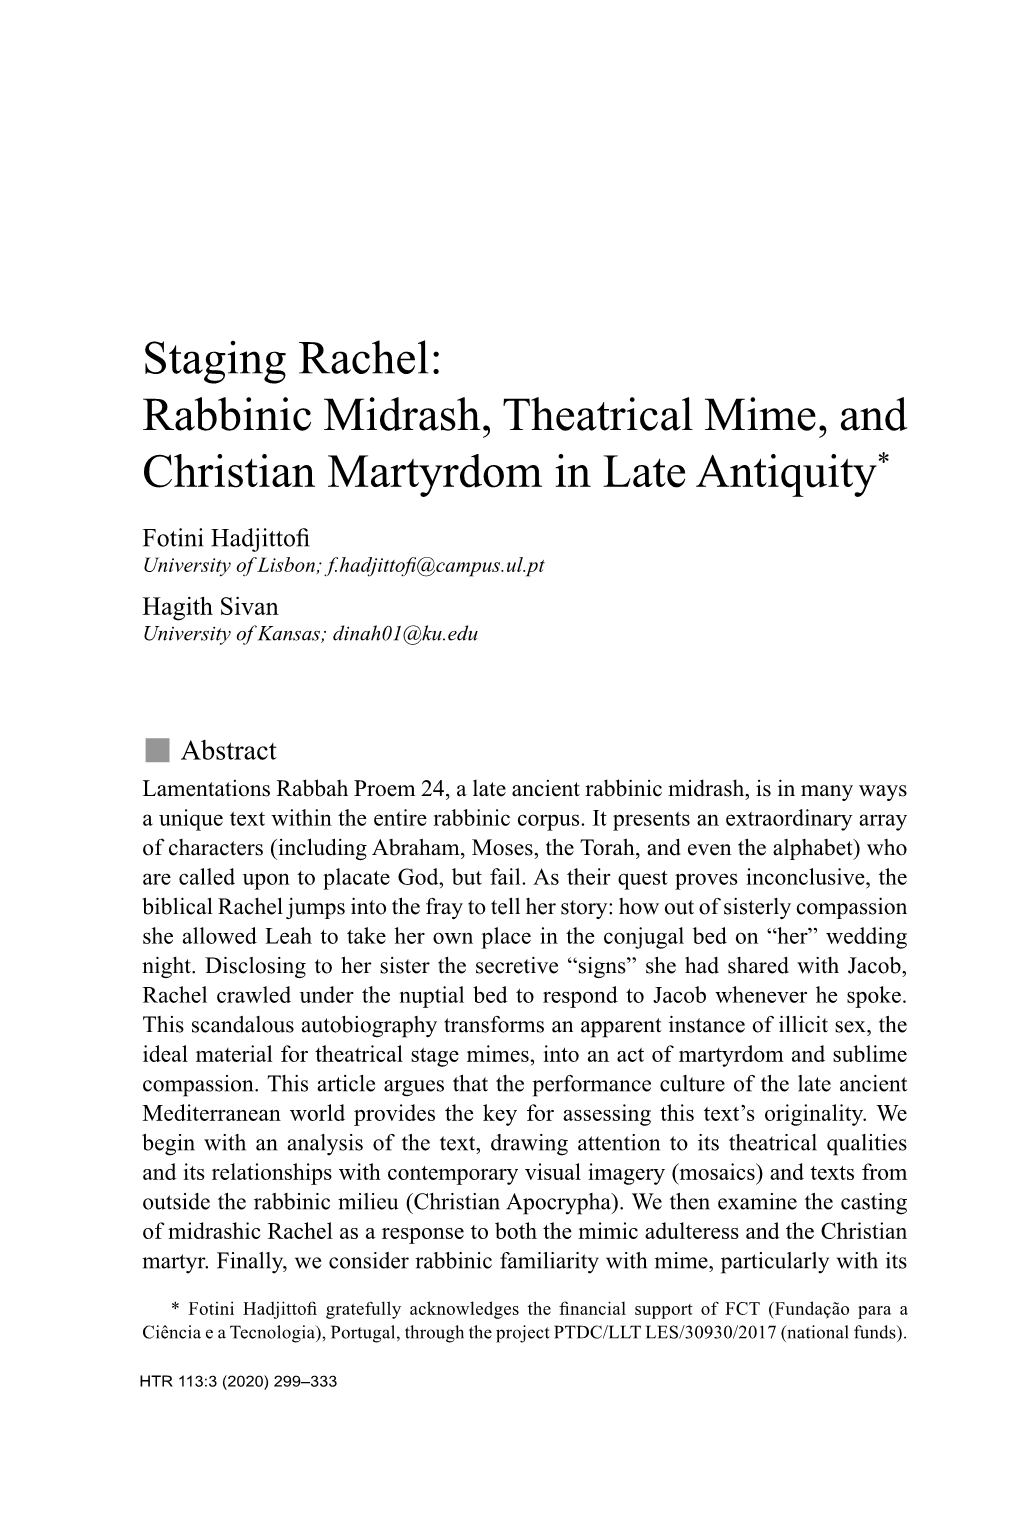 Staging Rachel: Rabbinic Midrash, Theatrical Mime, and Christian Martyrdom in Late Antiquity*